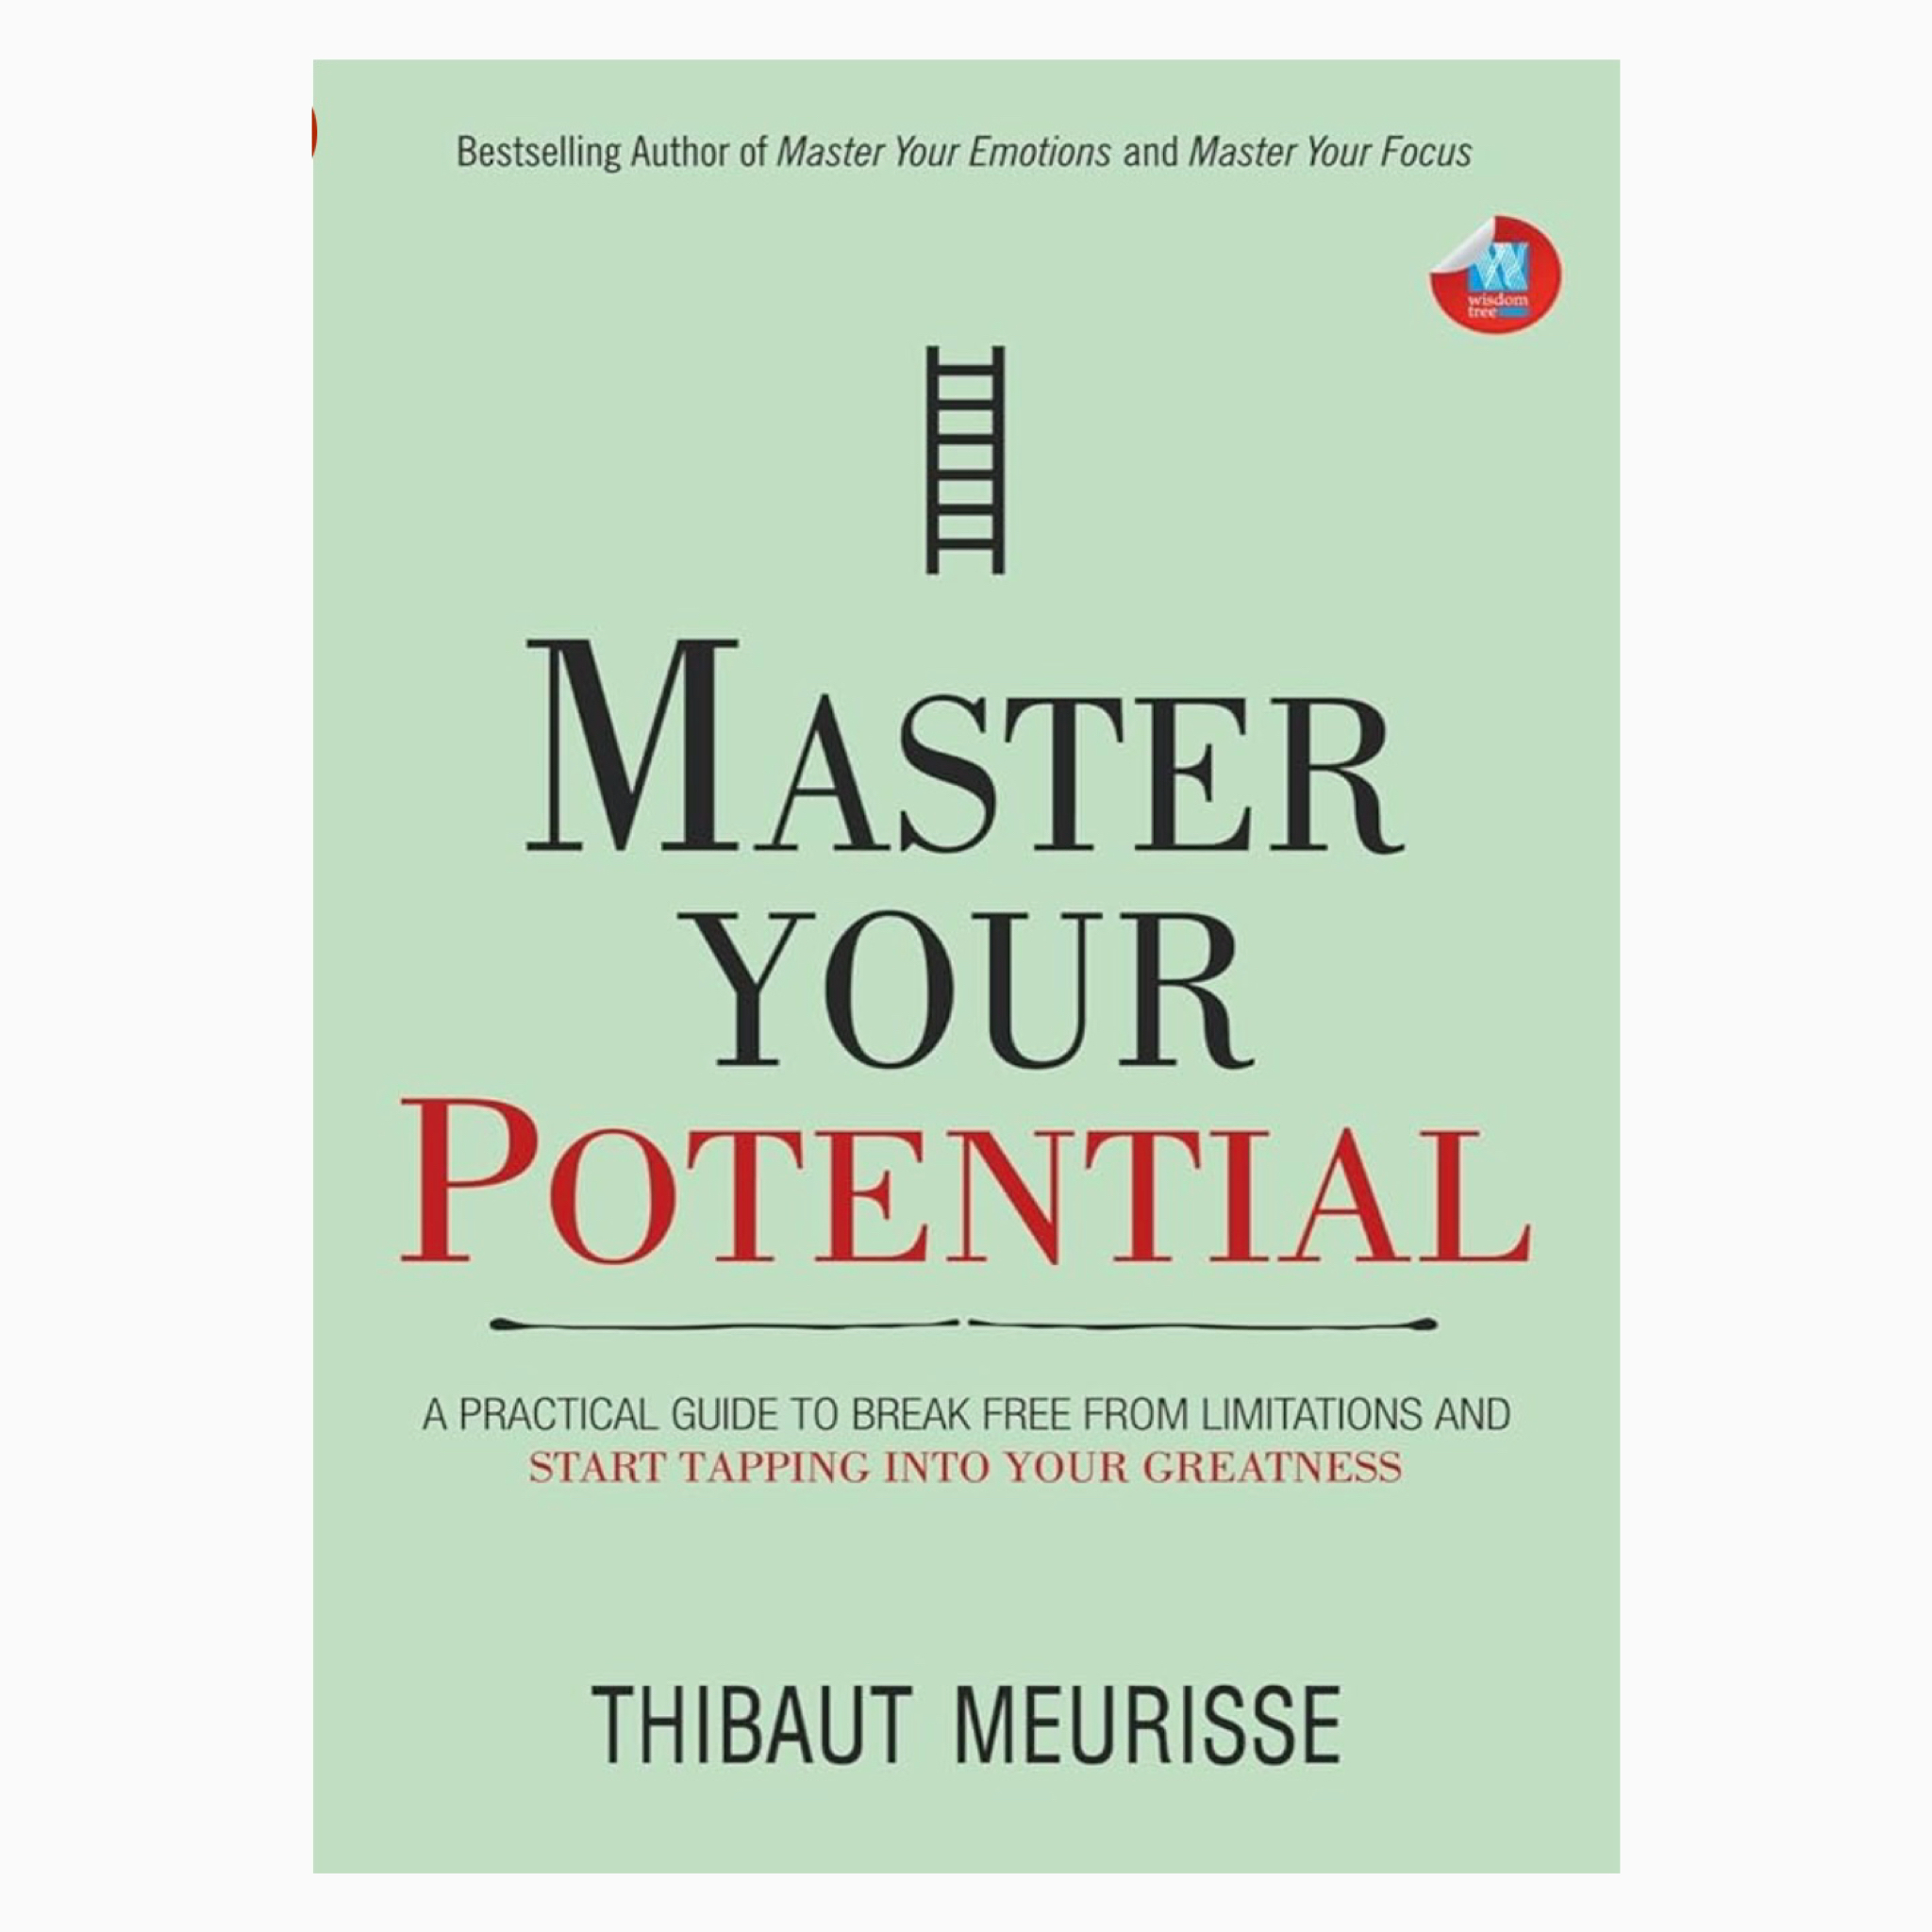 Master your potential by Thibaut Maurisse